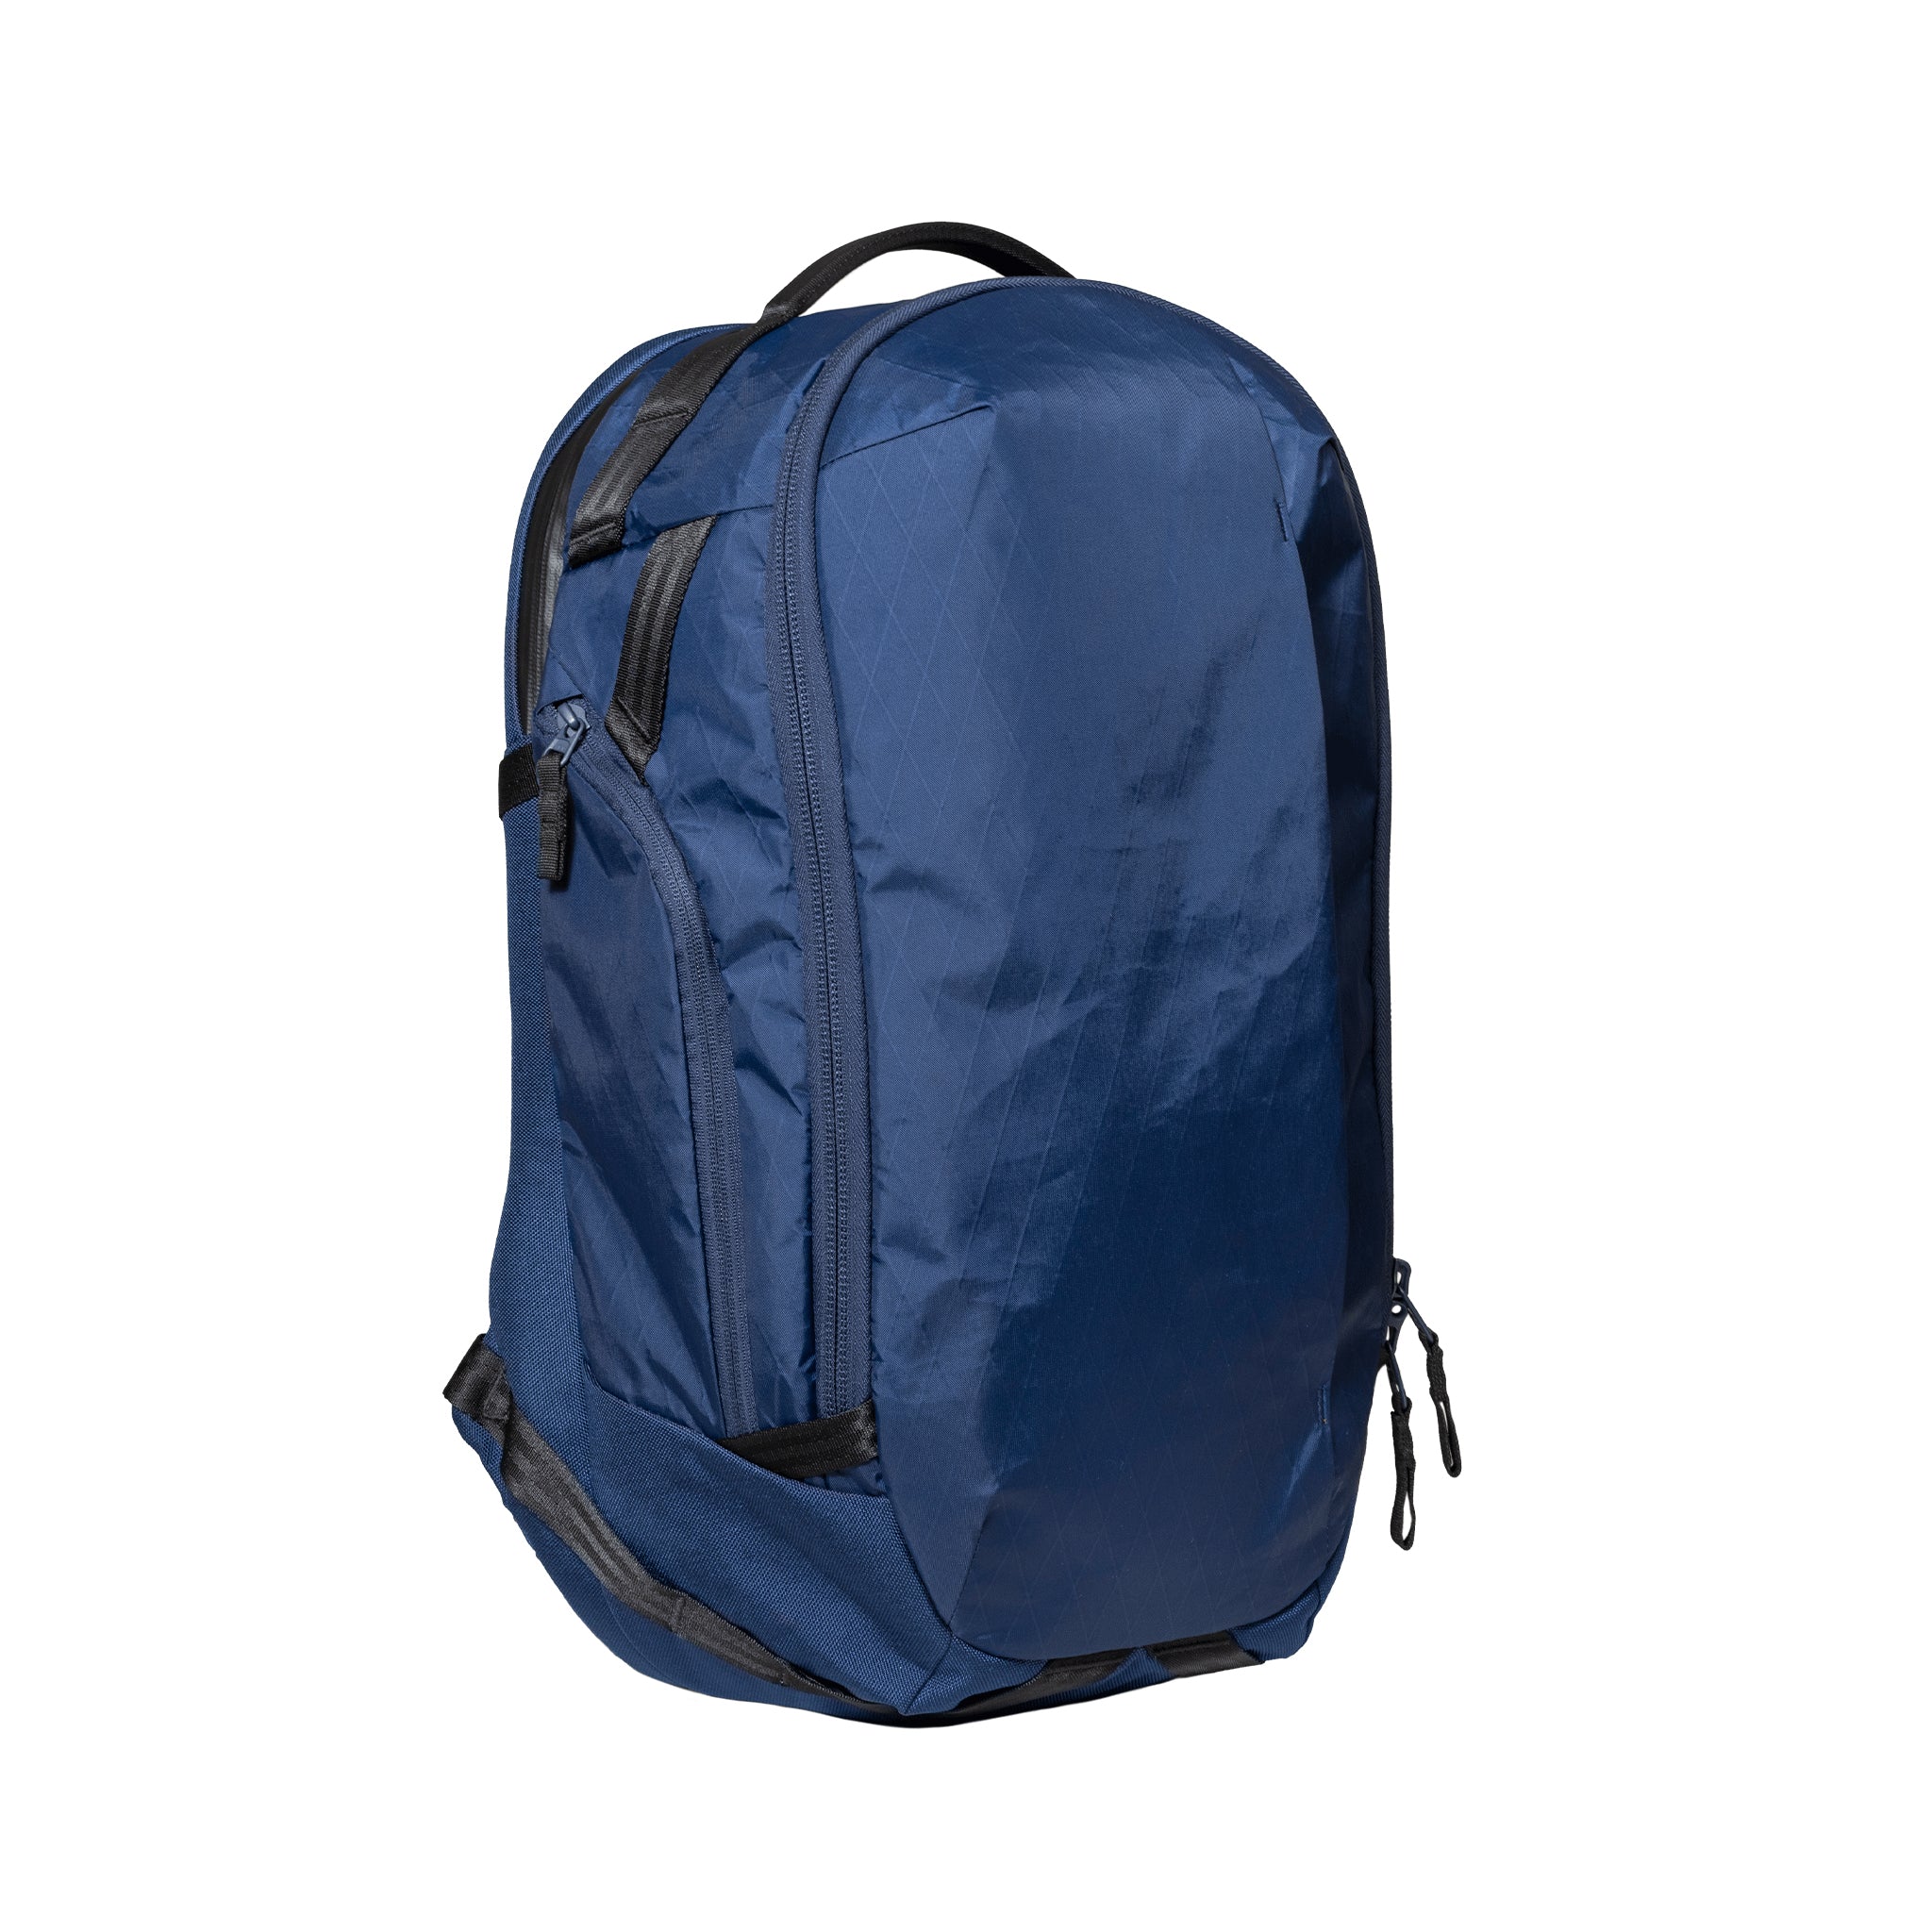 ABLE CARRY MAX BACKPACK - NAVY – Prime Skateboard